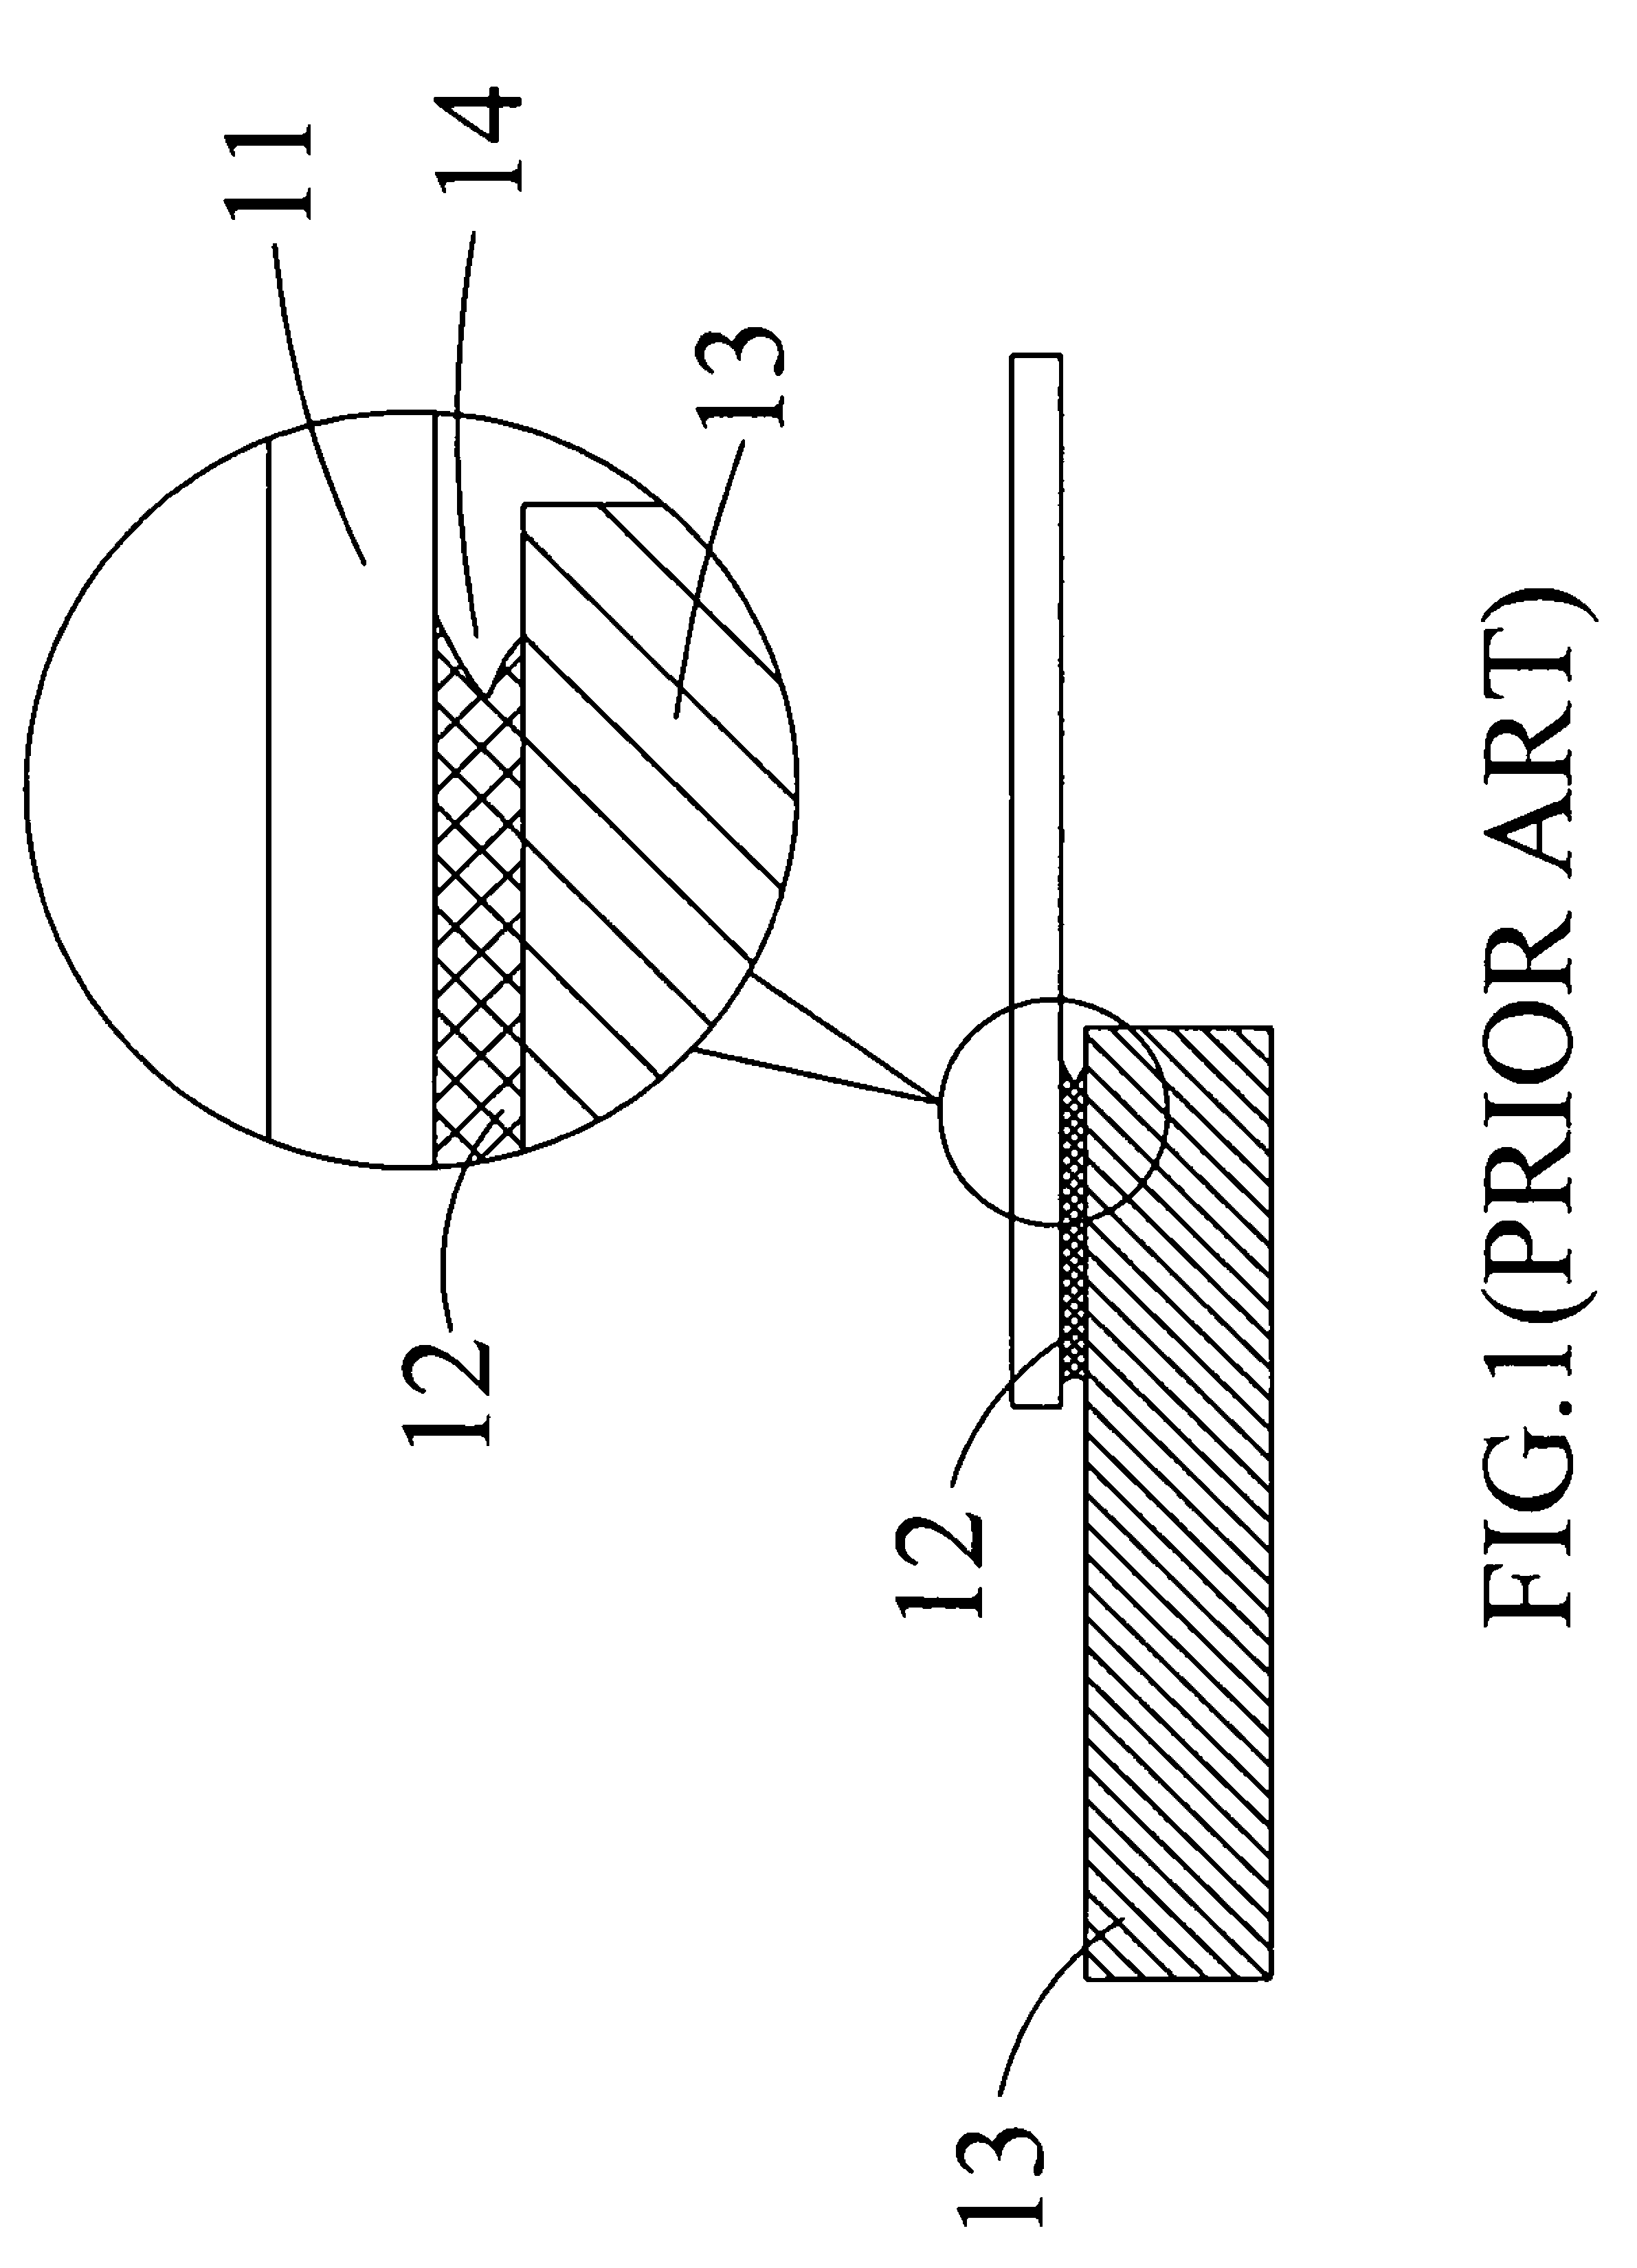 Nebulization apparatus with a packaging and fixing structure